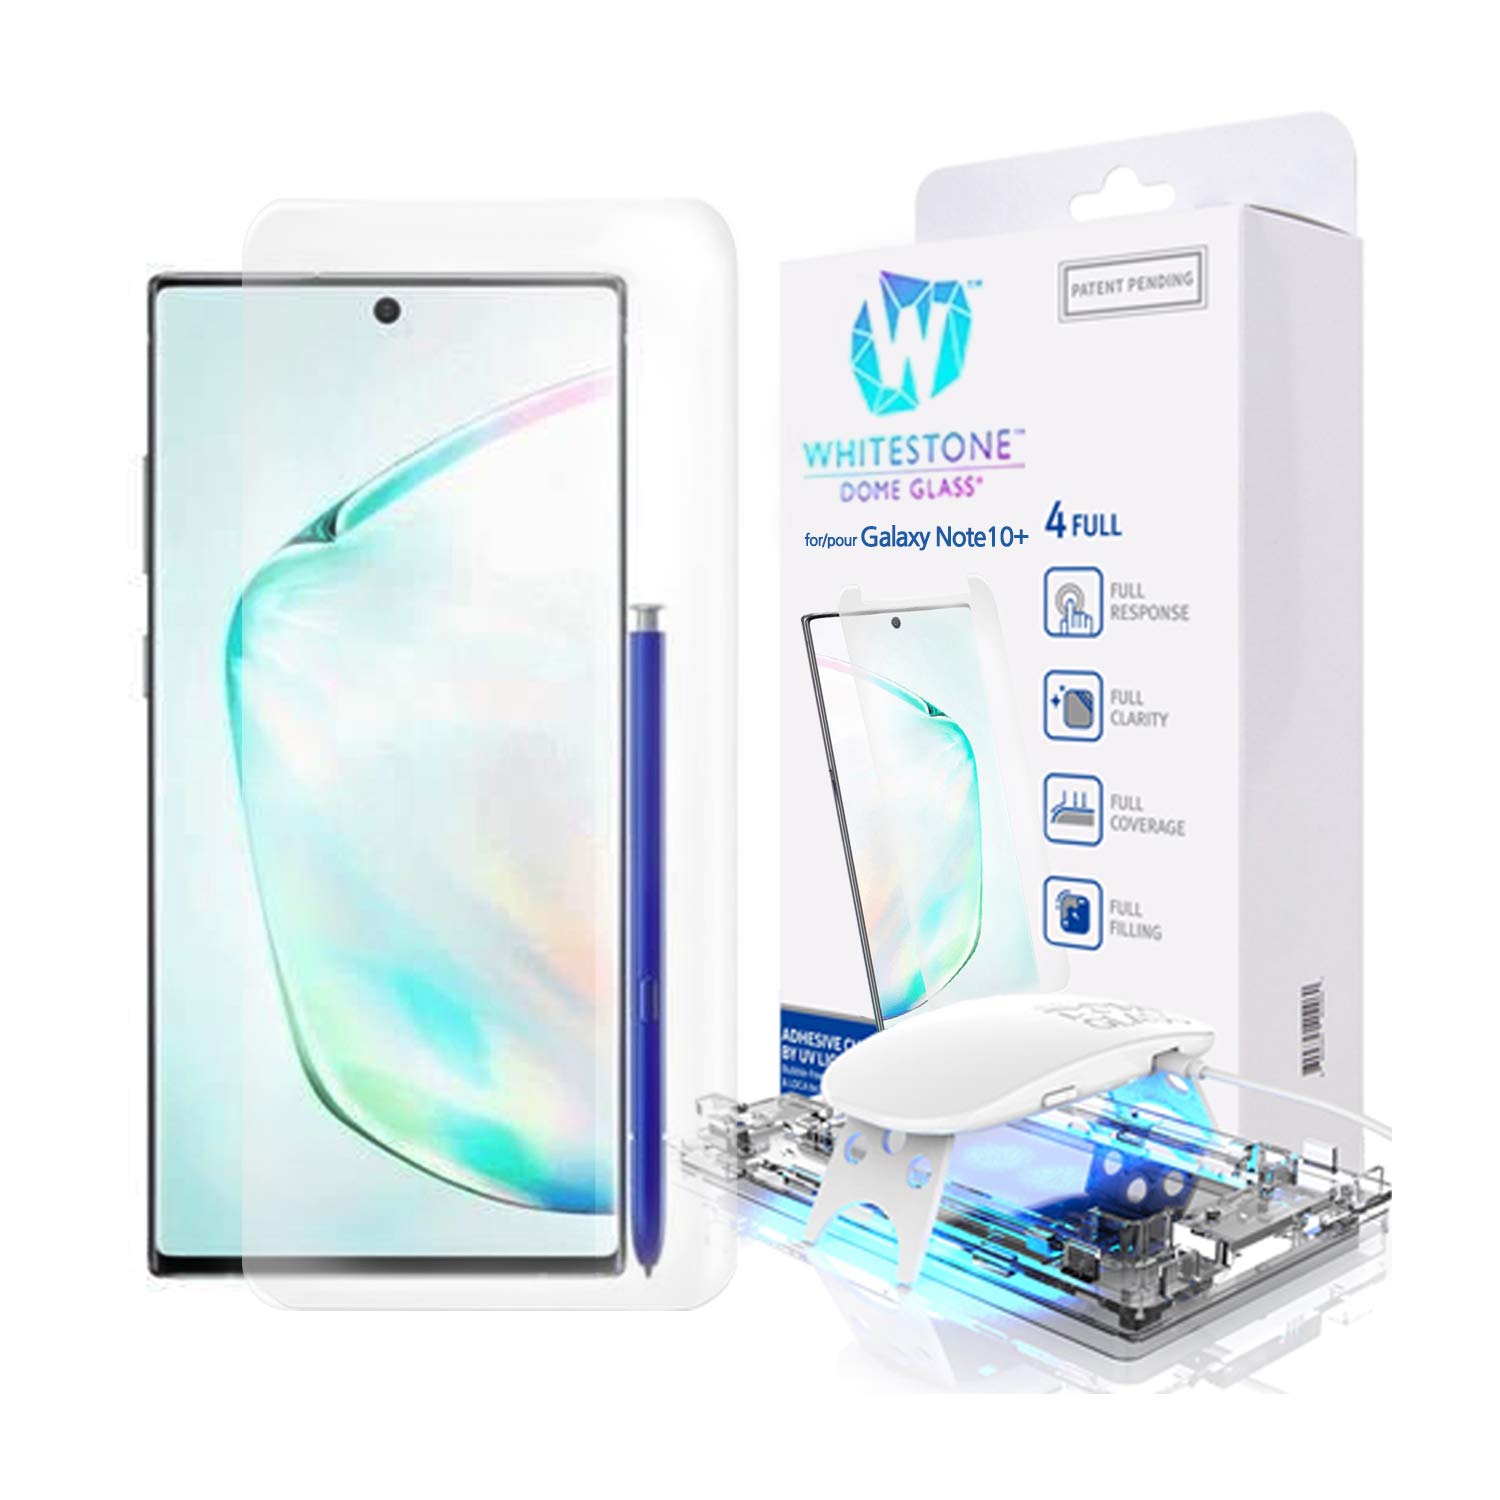 Book Cover Galaxy Note 10 Plus Screen Protector, [Dome Glass] Full 3D Curved Edge Tempered Glass Shield [Liquid Dispersion Tech] Easy Install Kit for Samsung Galaxy Note 10+ and Note 10 + 5G - One Pack